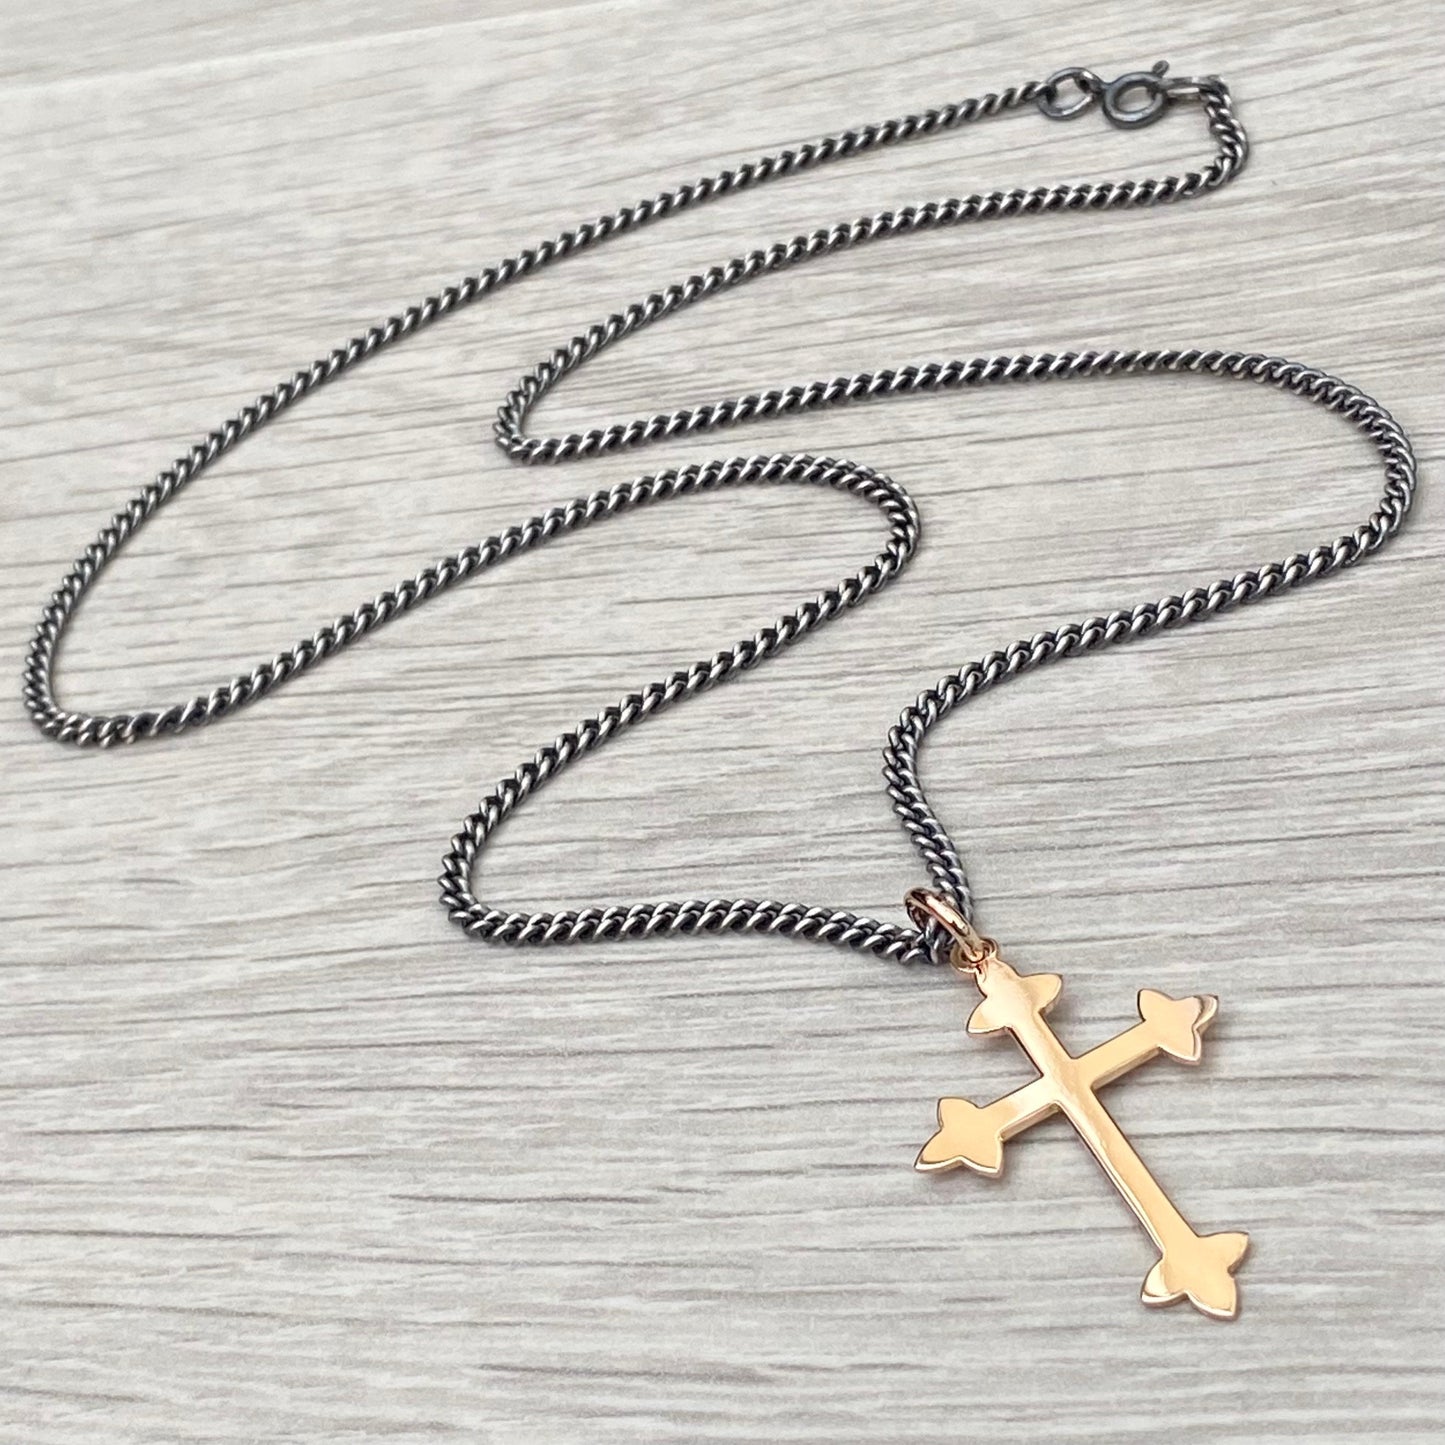 Vintage 9ct rose gold forked cross pendant on a new oxidised silver 2.4mm wide curb chain